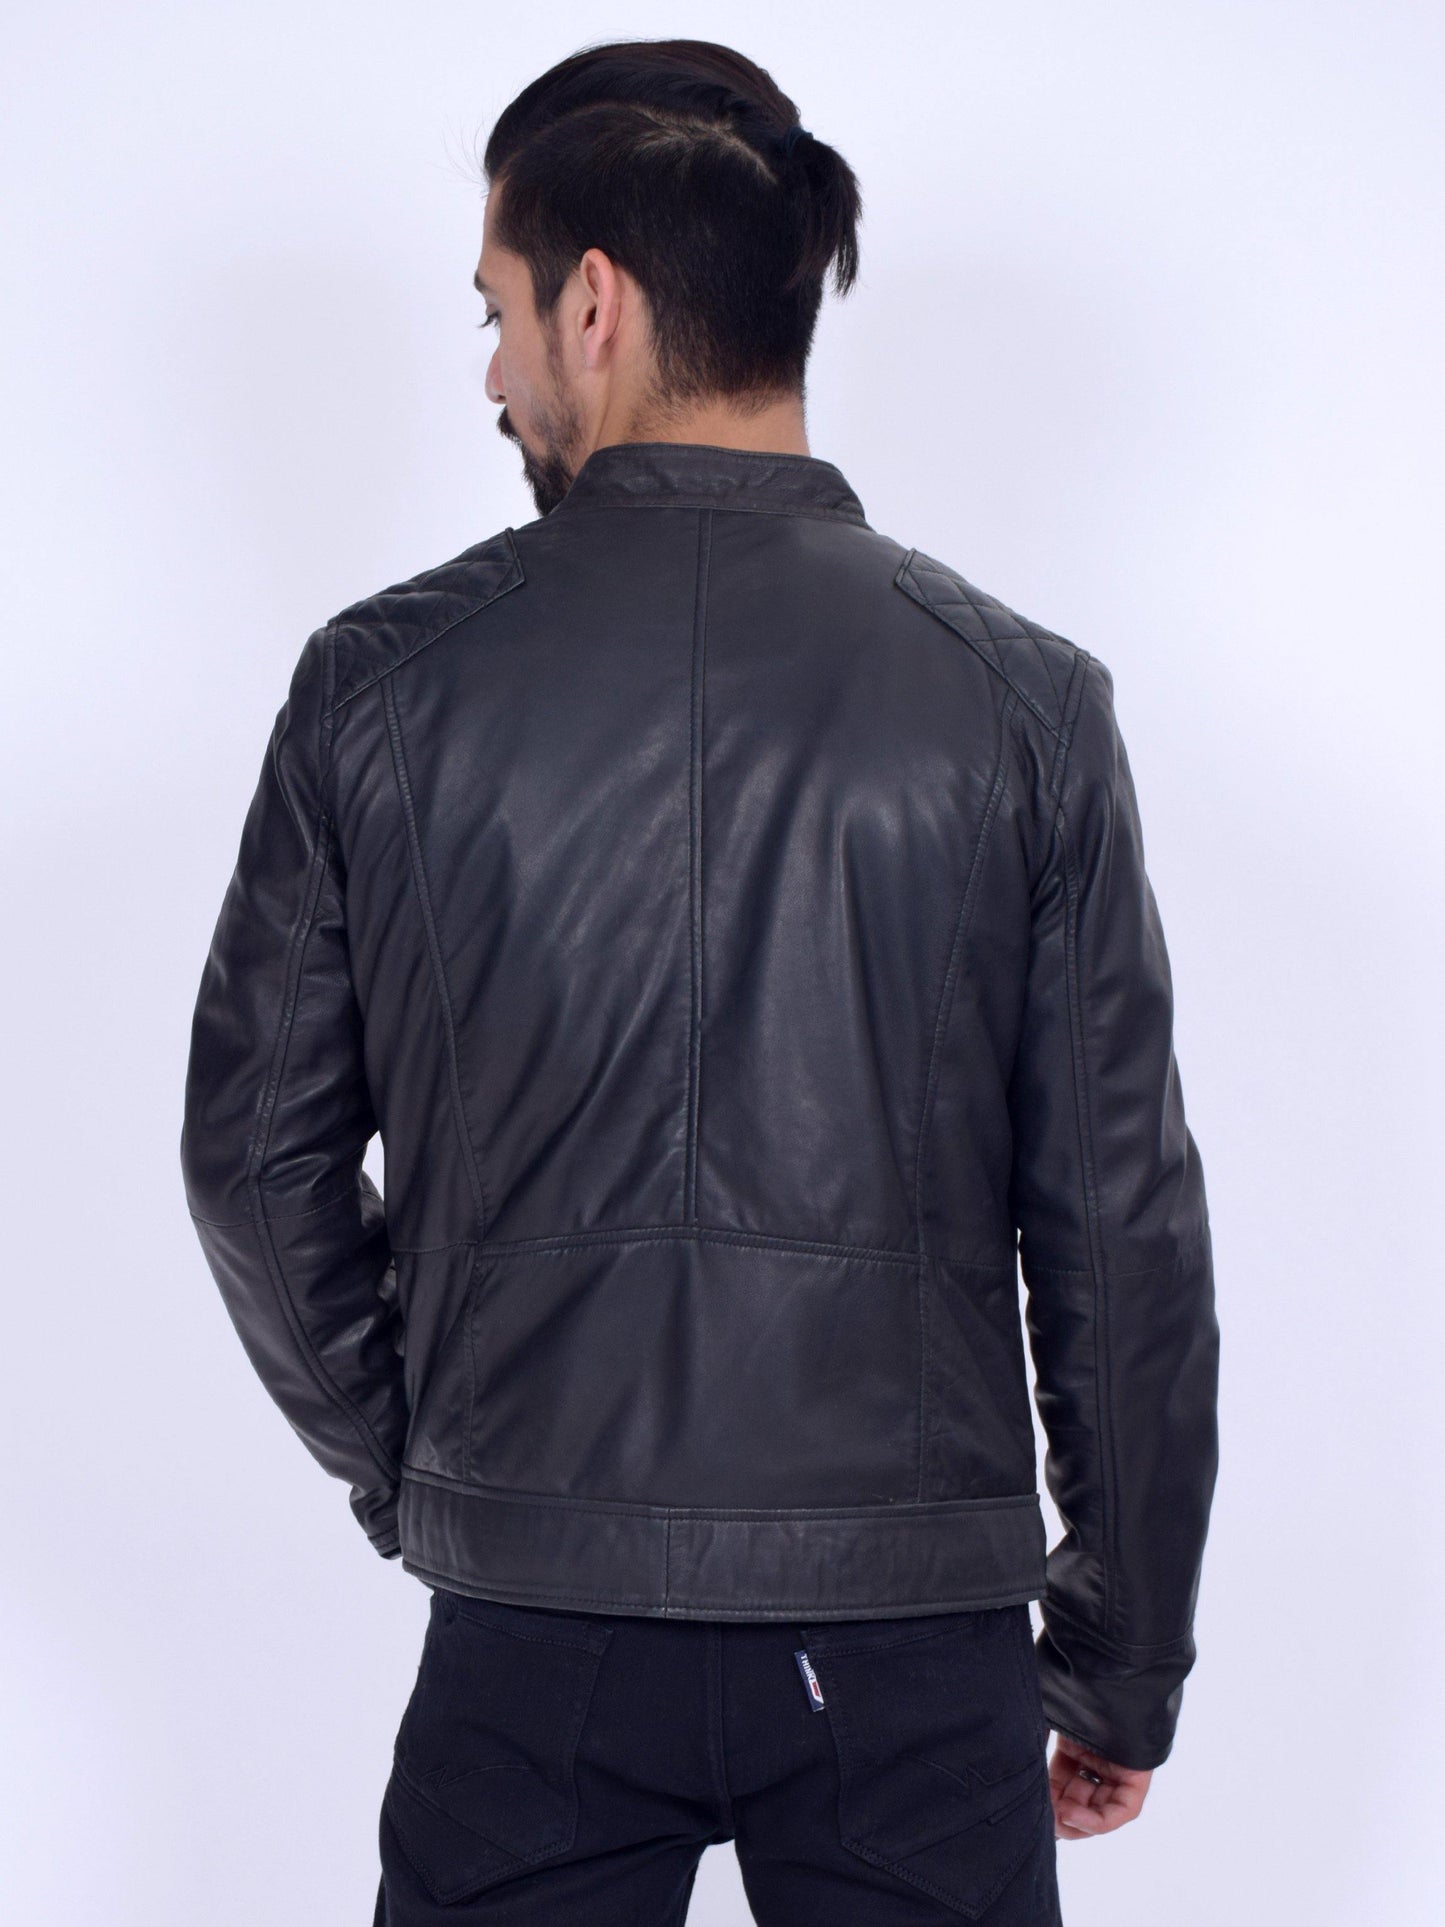 Iconic Black Leather Jacket - CASA OF K Official Online Store